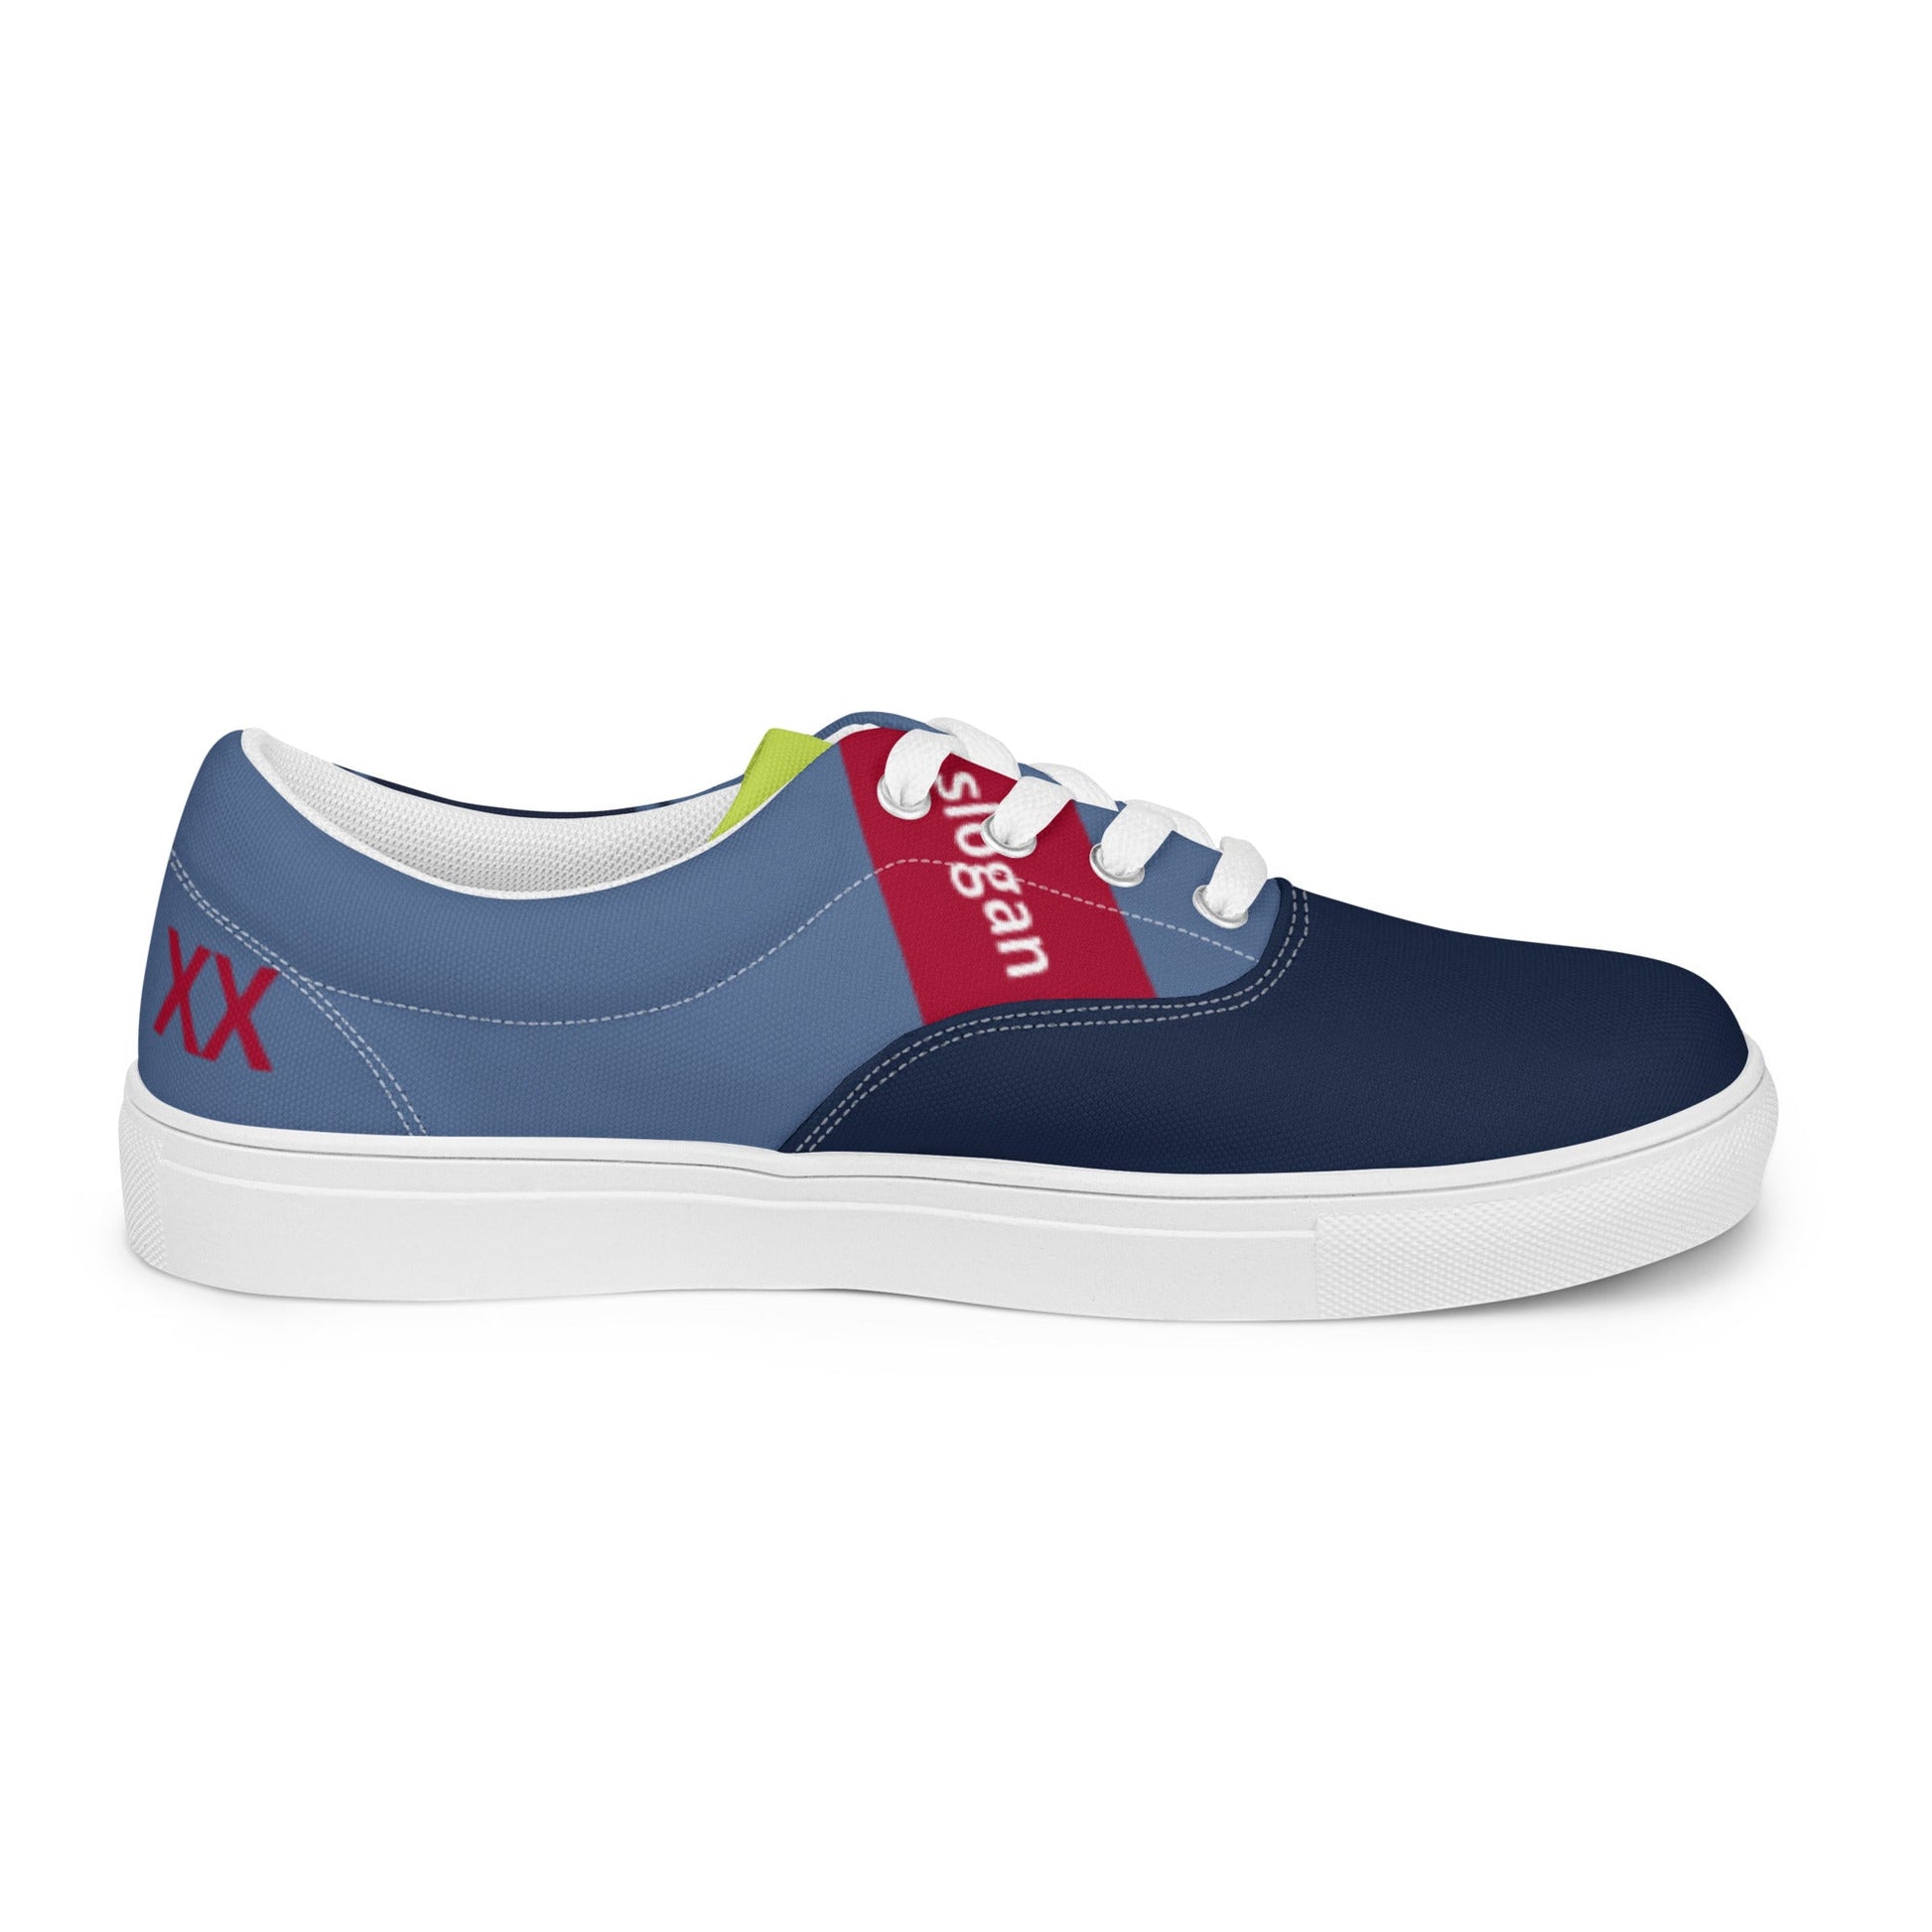 TIME OF VIBES - Women’s lace-up canvas shoes Demo CORPORATE - €109.00